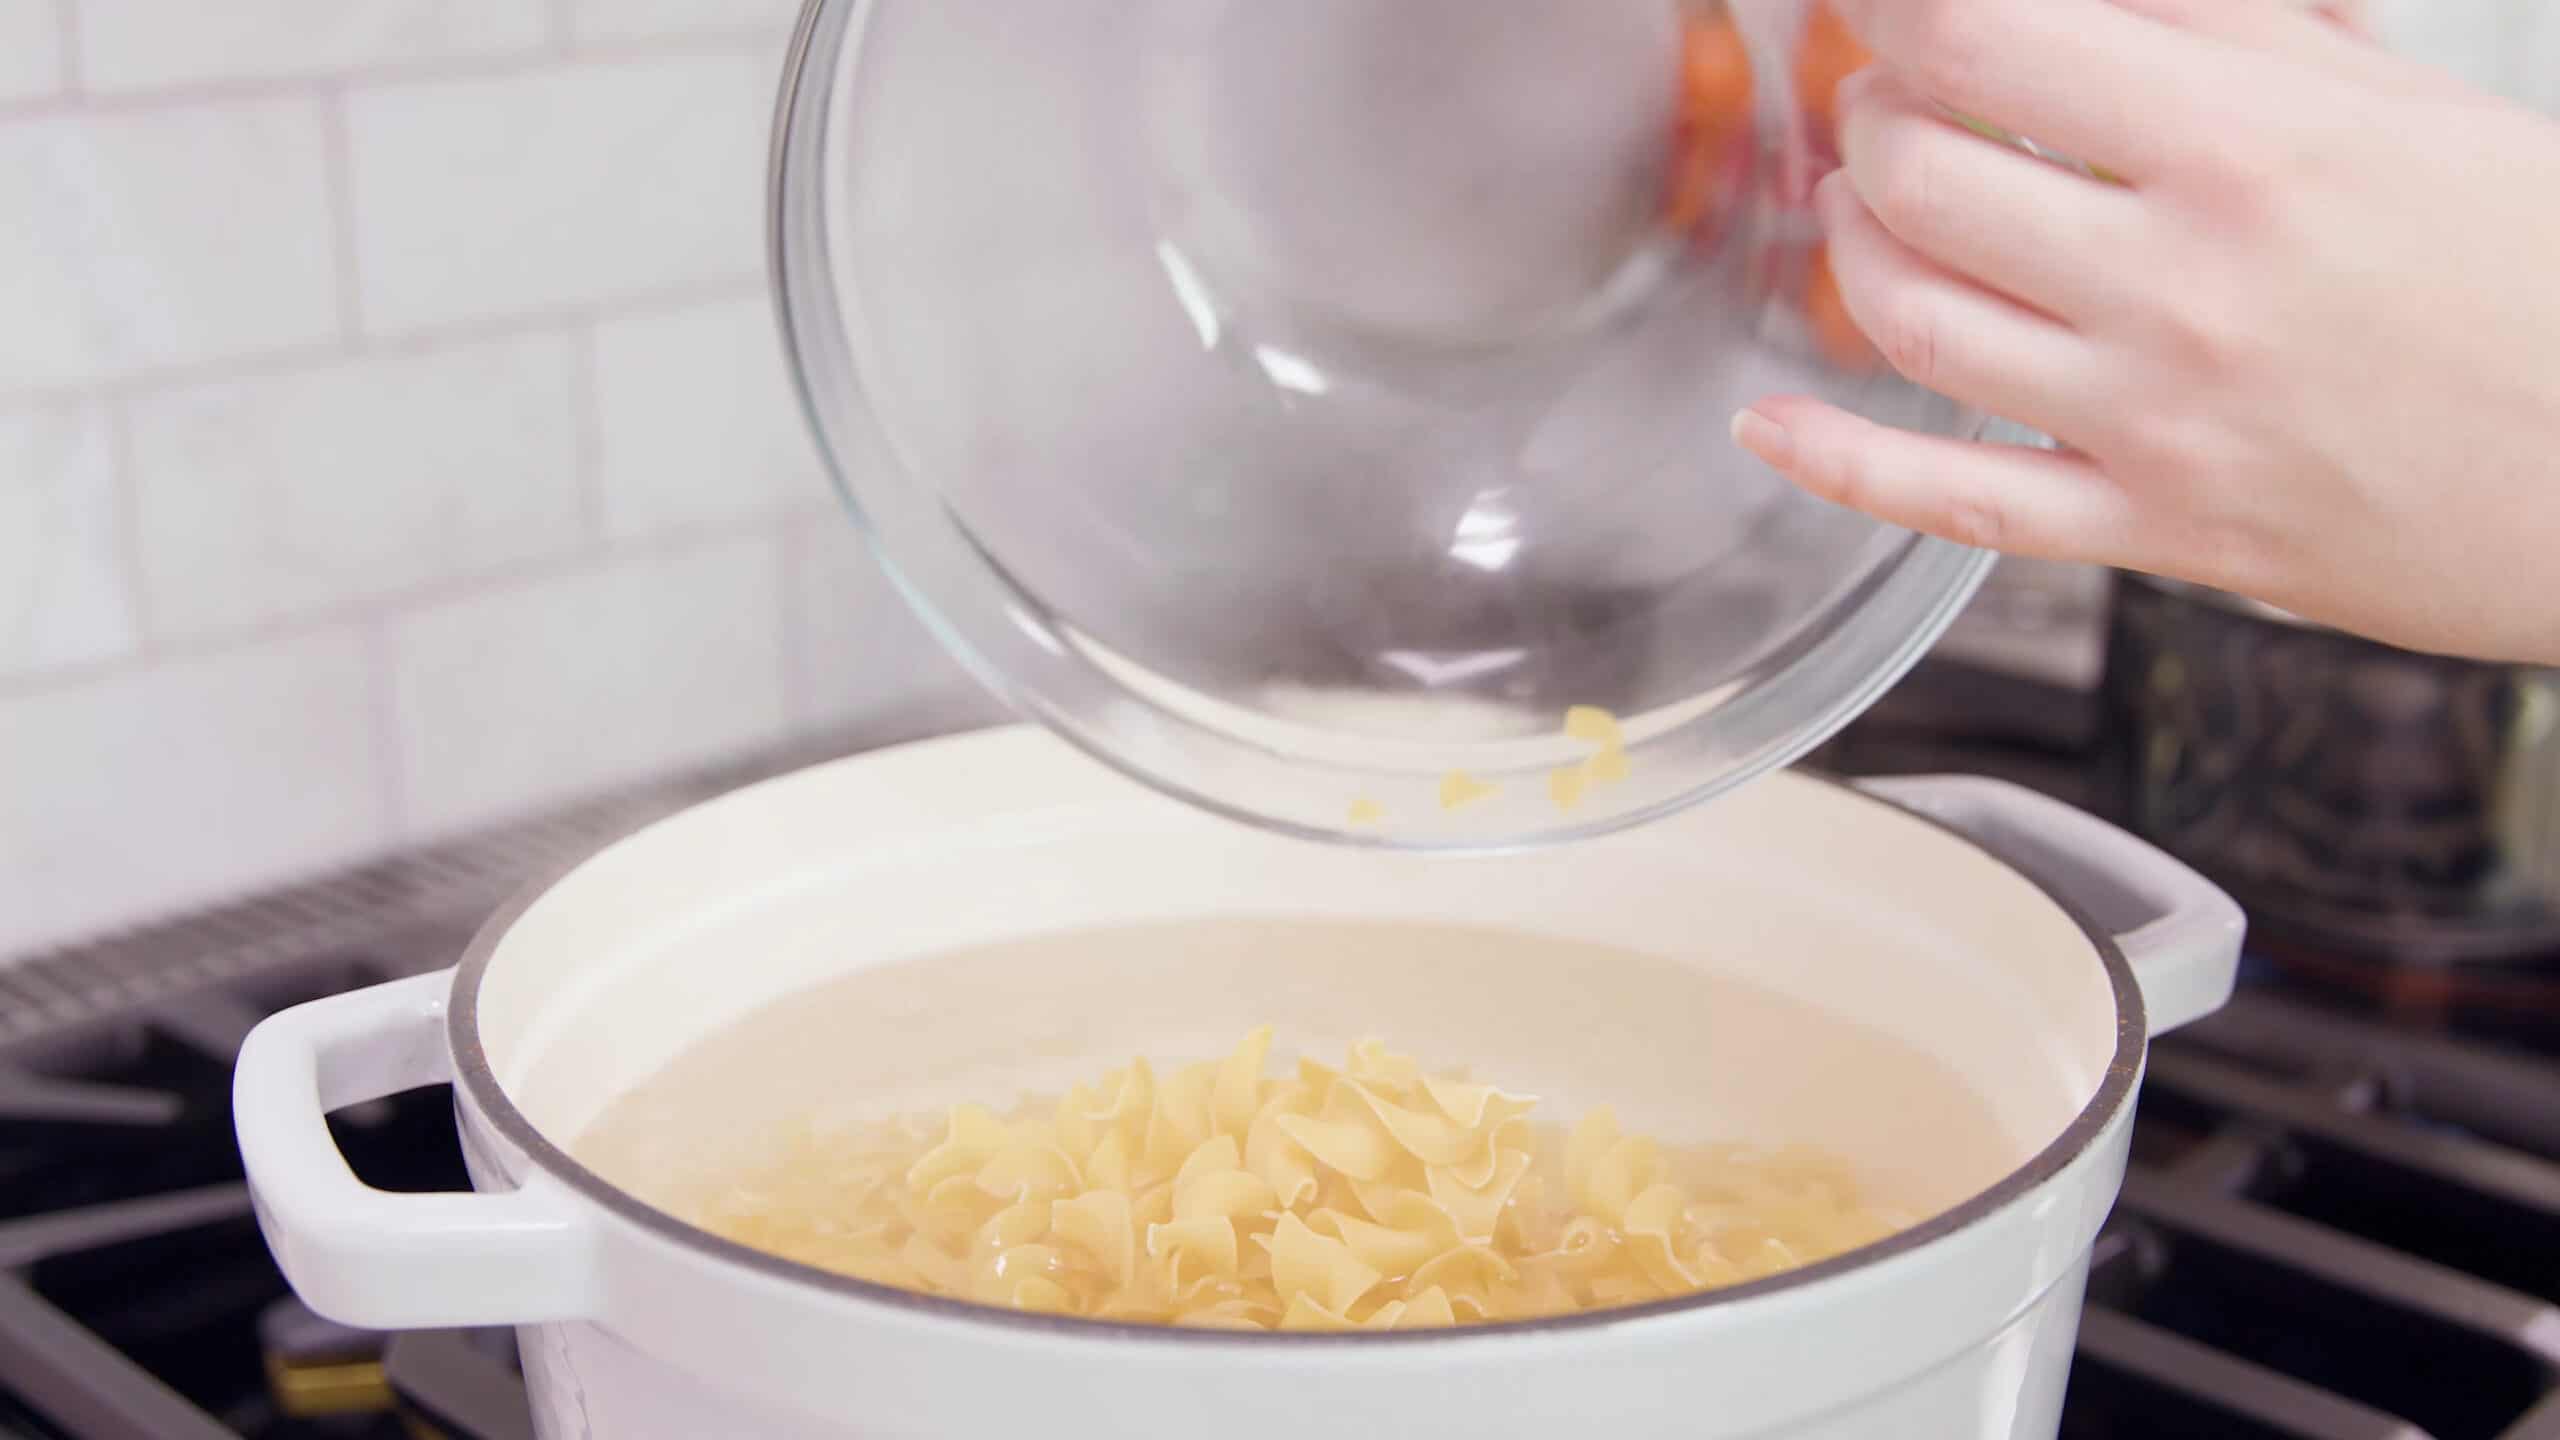 Angled view of white enamel coated cast iron pot filled with boiling water and extra wide egg noodles poured from a large clear glass mixing bowl all over a stovetop burner.